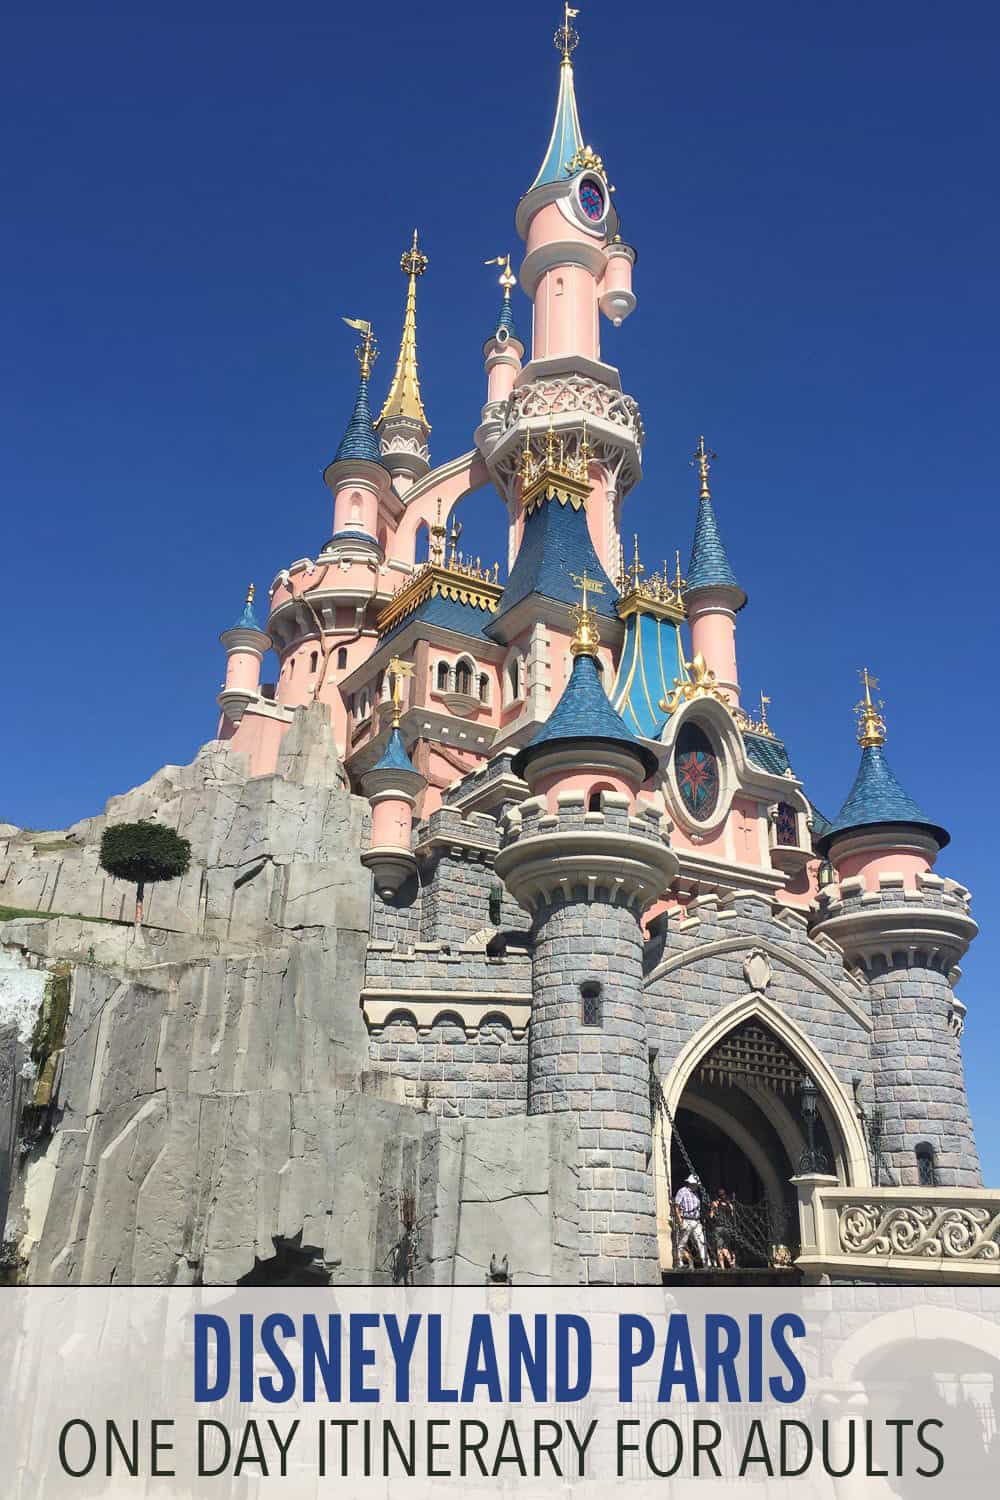 Disneyland Paris adult itinerary - follow this plan to experience the highlights of both parks (Disneyland and Walt Disney Studios) in one day. The post also includes time and money saving tips to make the most of your stay.